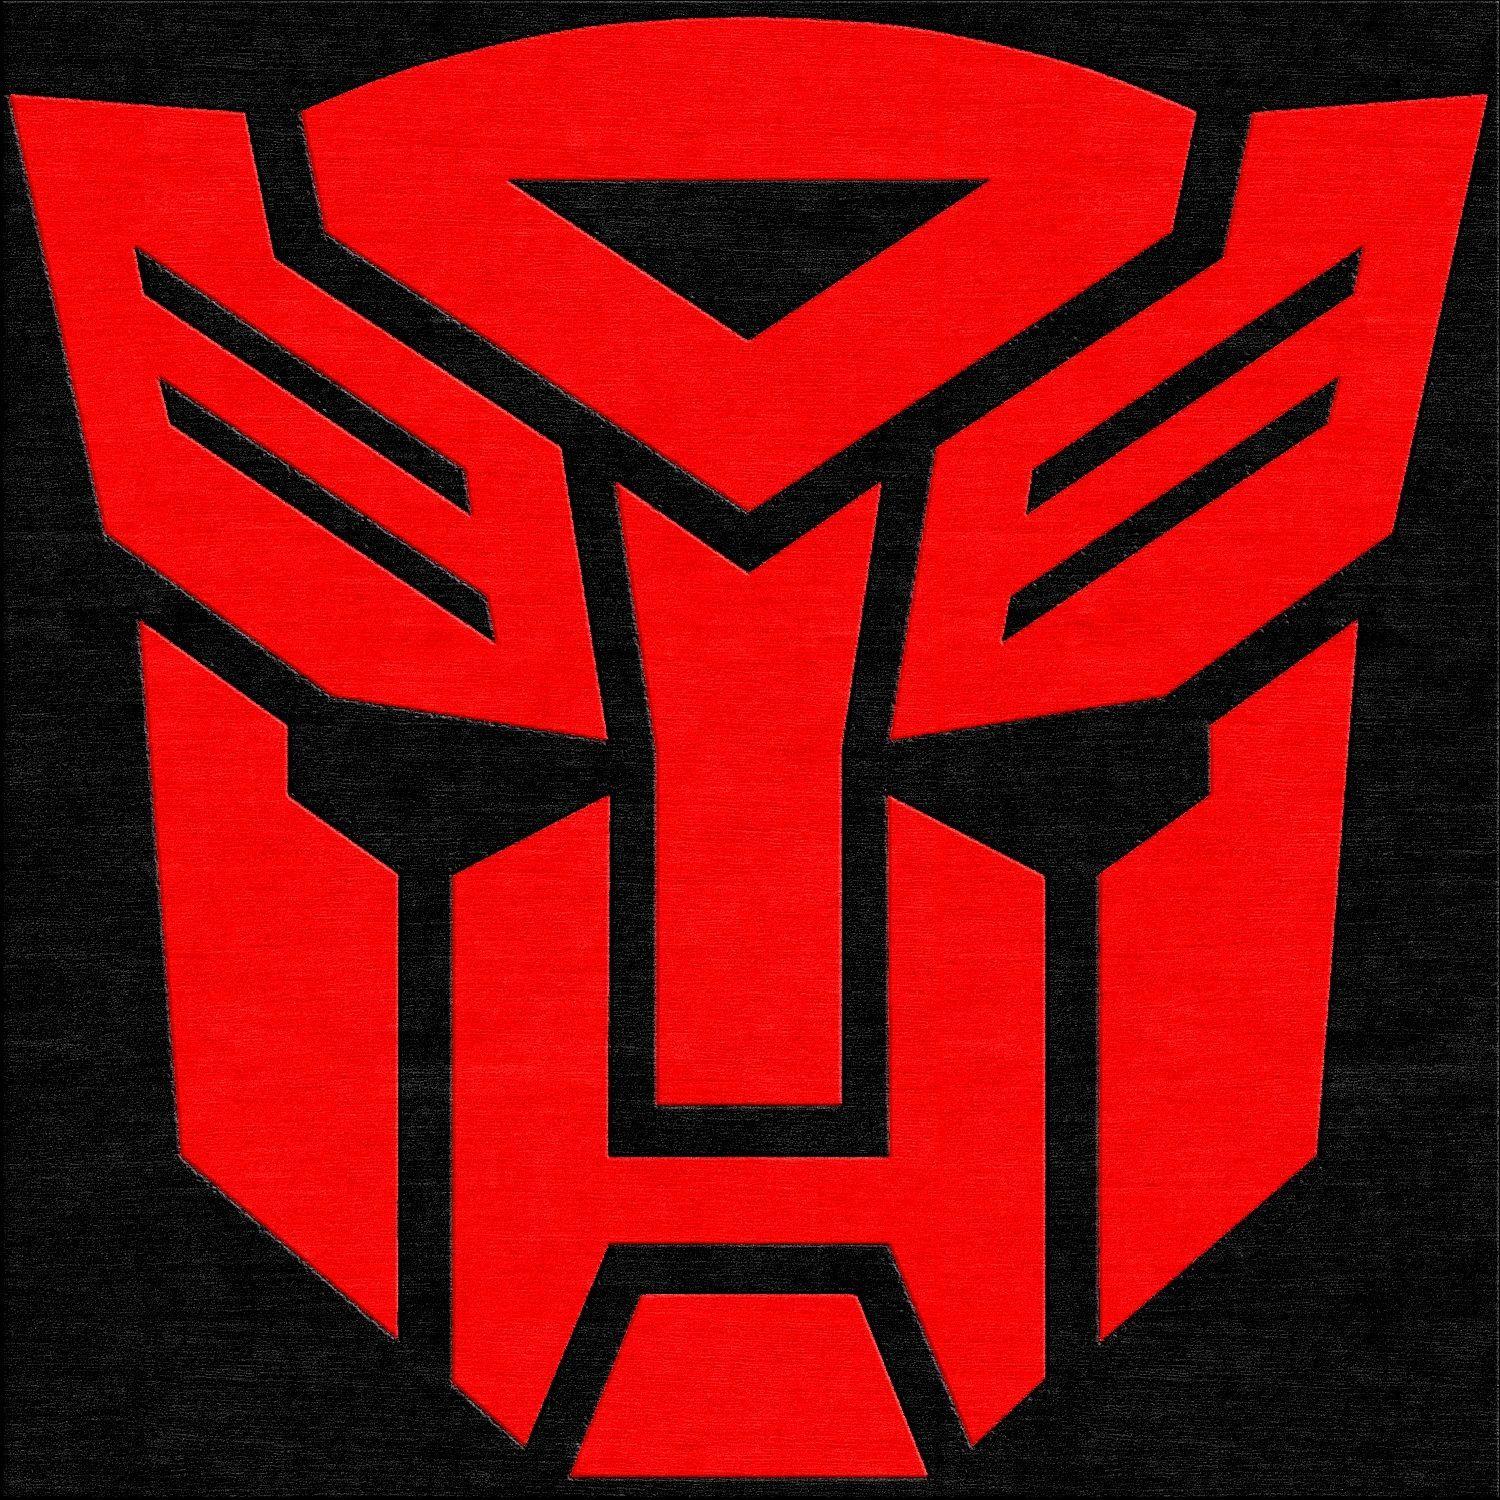 Red Transformers Logo - Childrens Rugs | Transformers | Transformers, Rugs, Childrens rugs